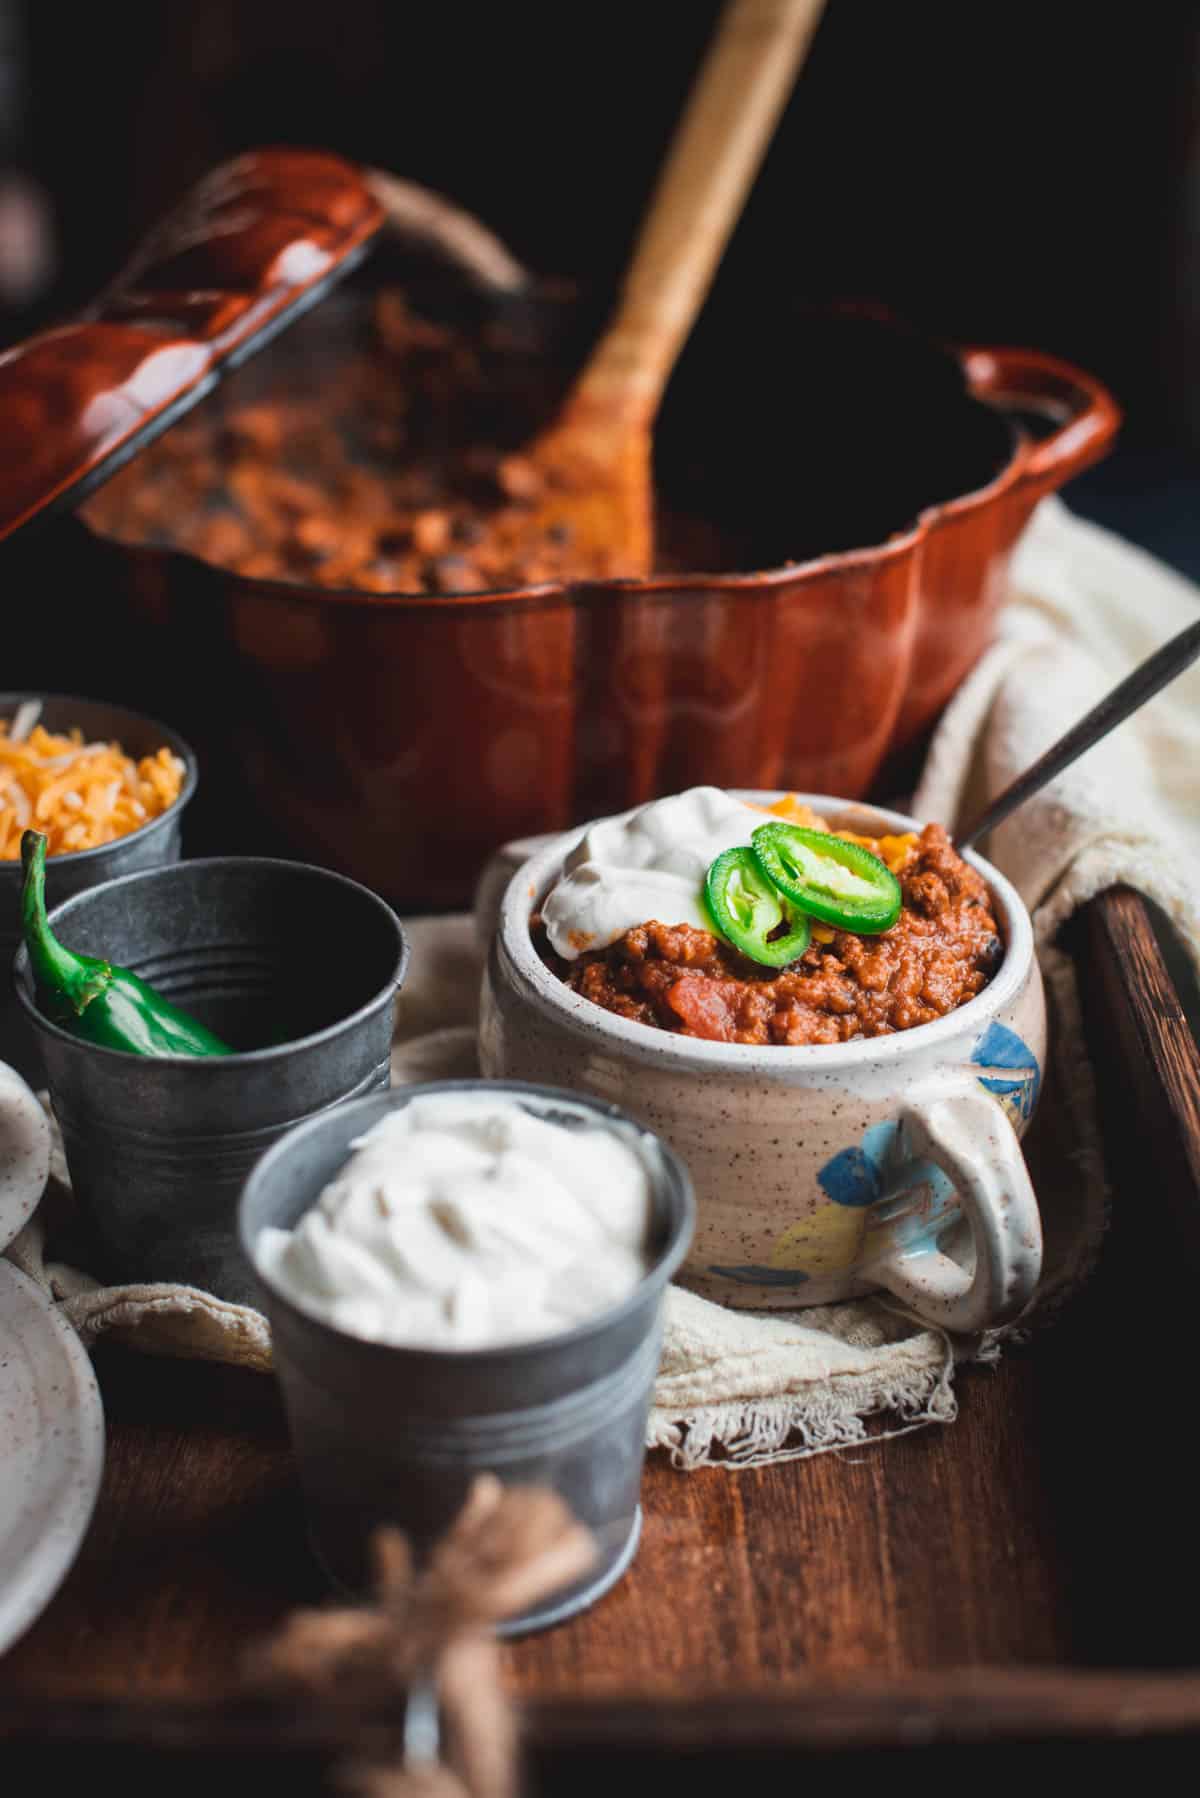 In the background is a pumpkin shaped pot containing chili and a wooden spoon. In the foreground is a white bowl filled with pumpkin beef chili and topped with sour cream and jalapenos. There are small buckets next to it with grated cheese, jalapenos and sour cream.